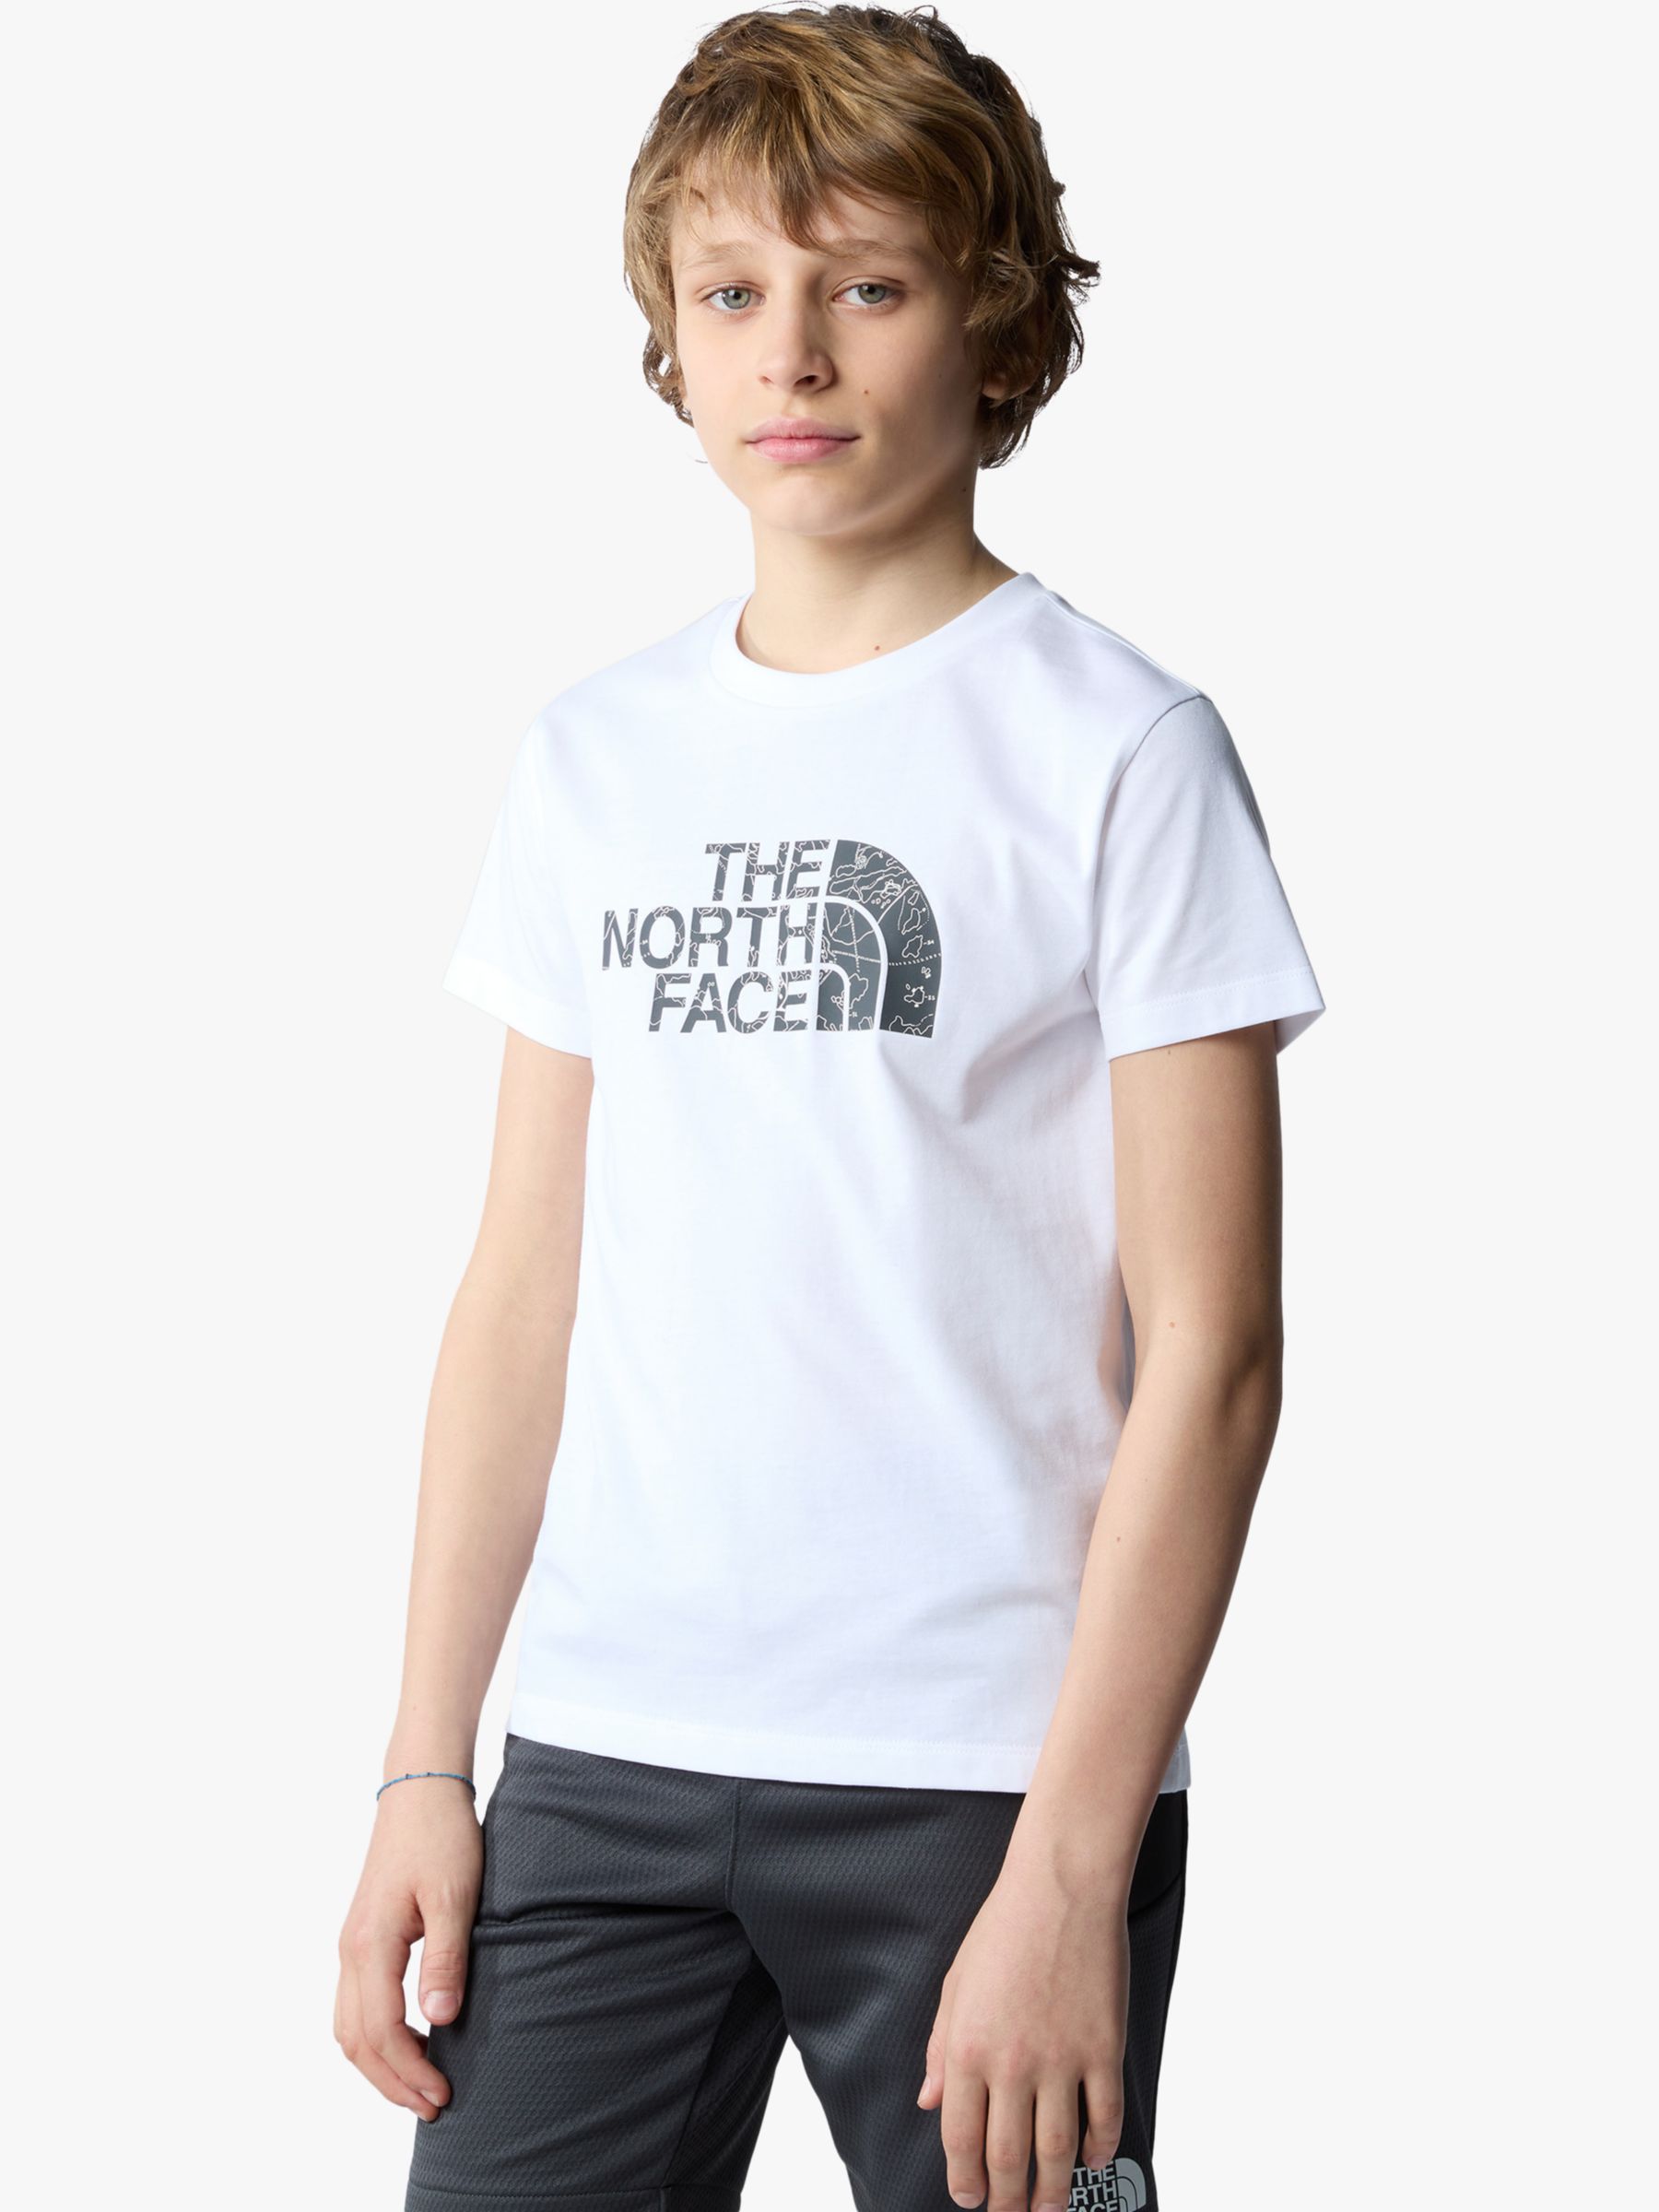 The North Face Kids' Easy Logo Short Sleeve T-Shirt, White, XL